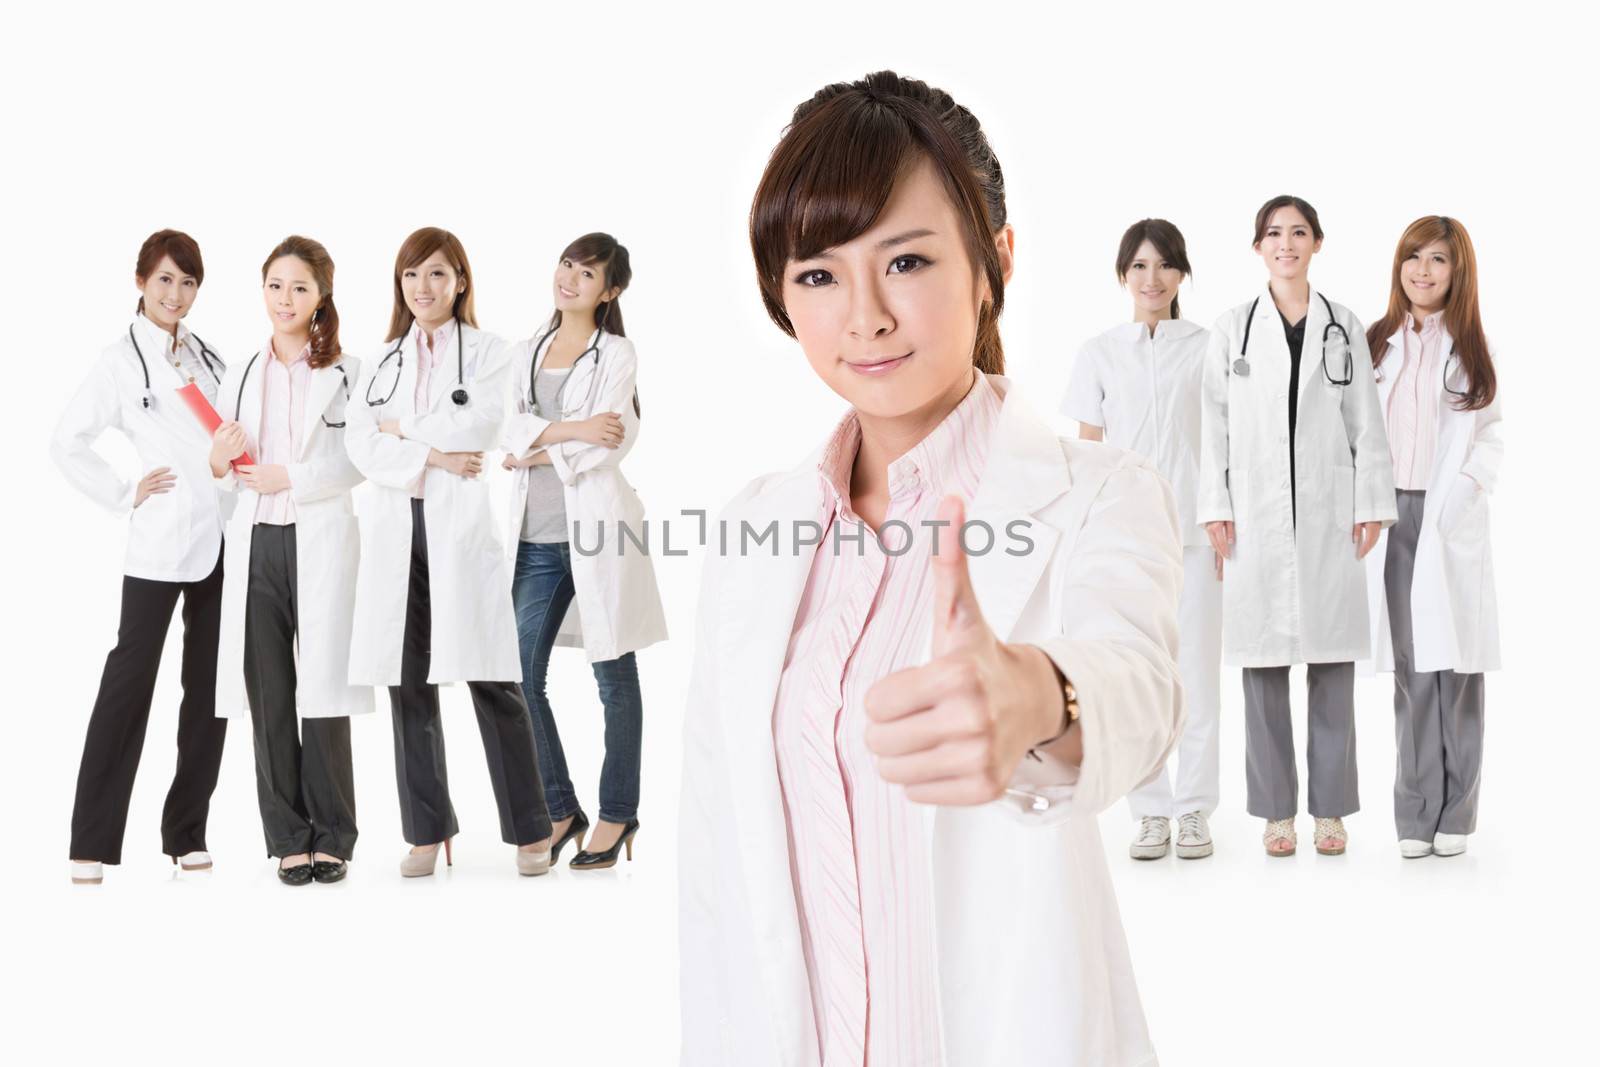 Asian doctor woman stand in front of her team and give you an excellent sign, closeup portrait on white background.